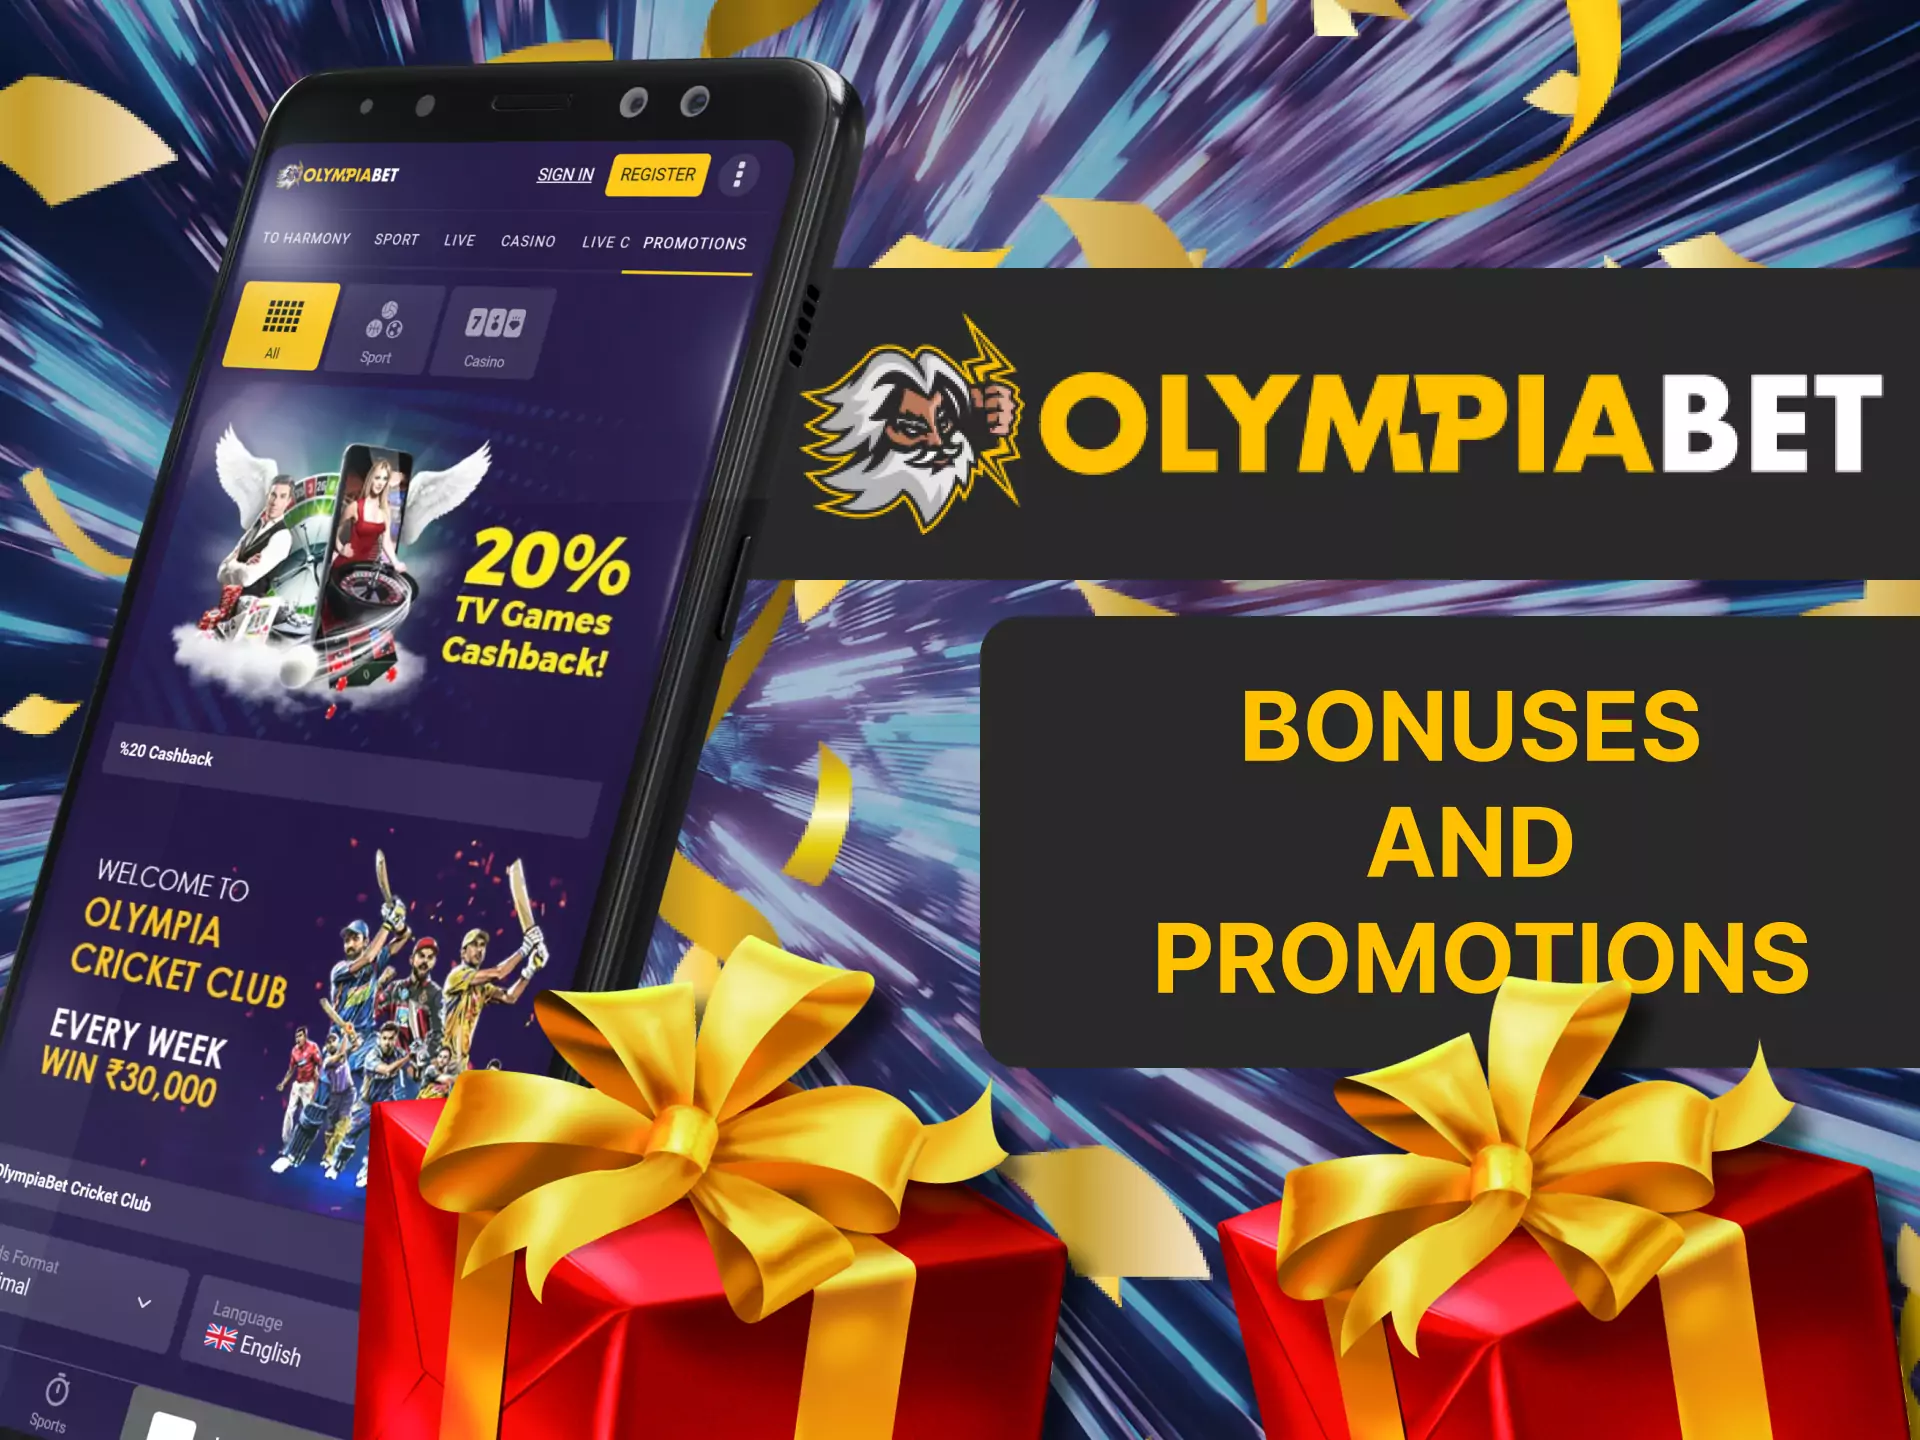 The Olympiabet app provides its players with plenty of bonuses and special favorable offers.